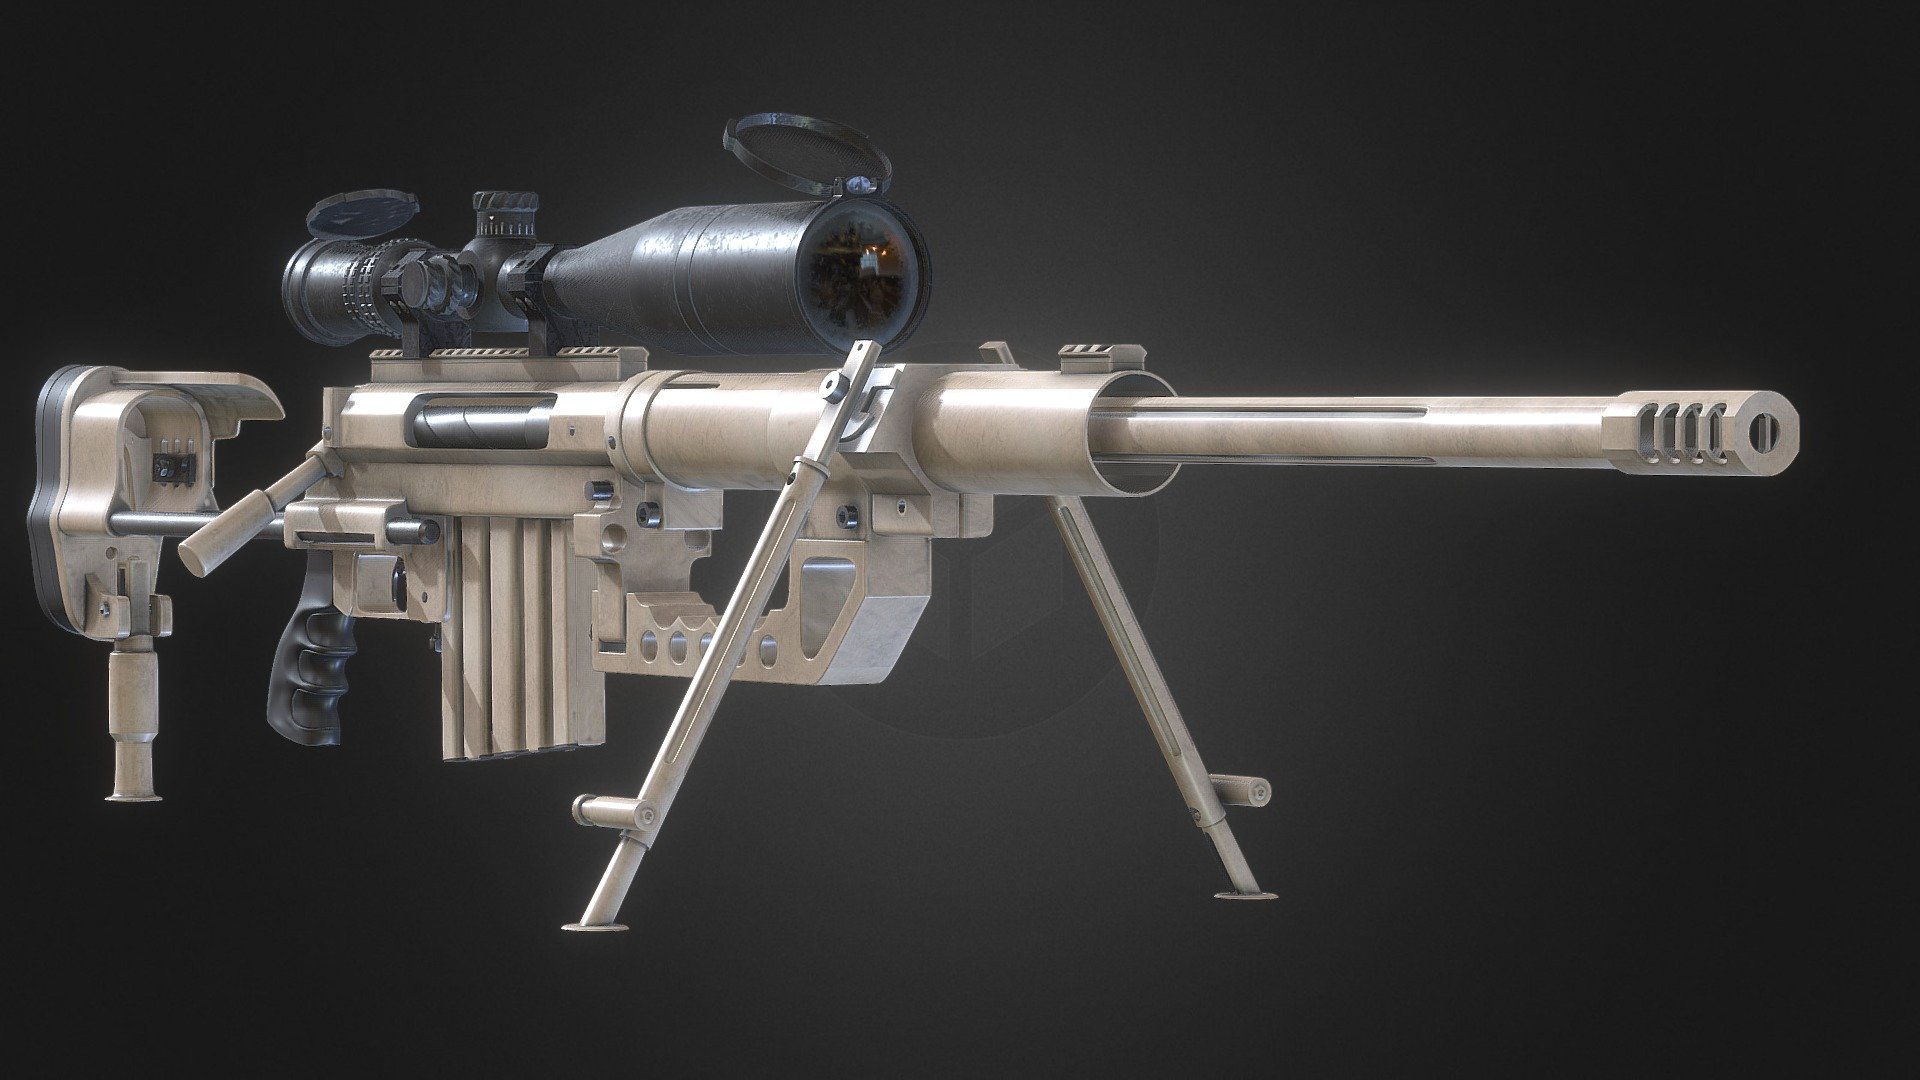 Free 3D model and high detailed weapon CHEYTAC M200, feel free to use this model on personal projects, but please, don't sell it 
The whole model has 2 texture sets, 1 set for the body and other set for the scope.
The whole model has 4k textures 3d model